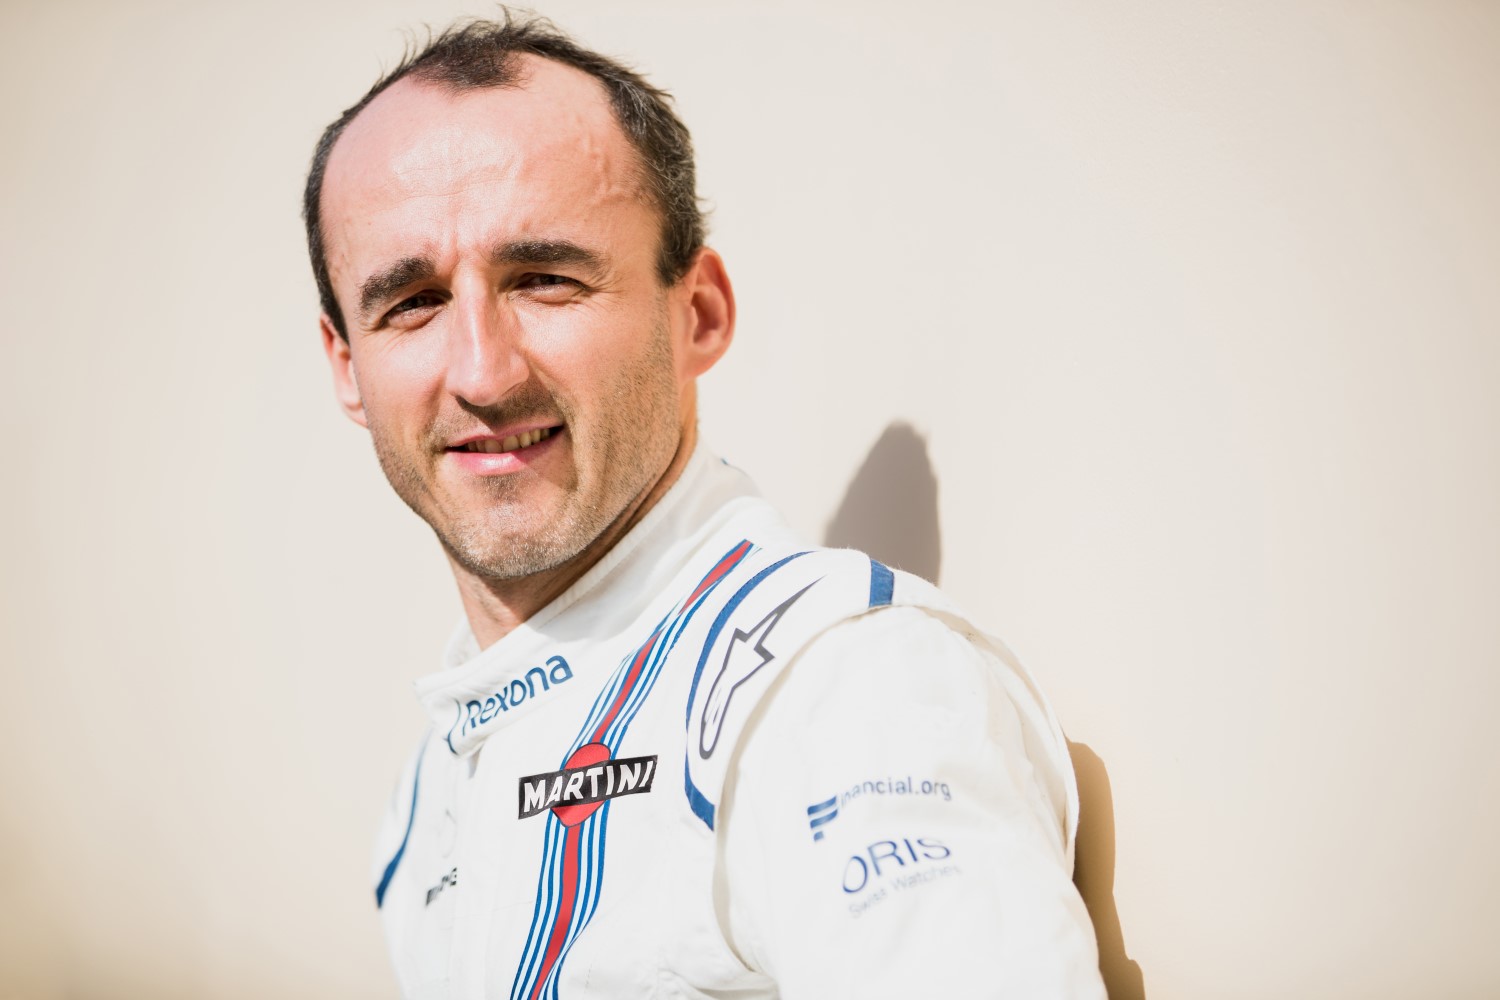 Kubica's check was big enough to clean the track a few Friday mornings